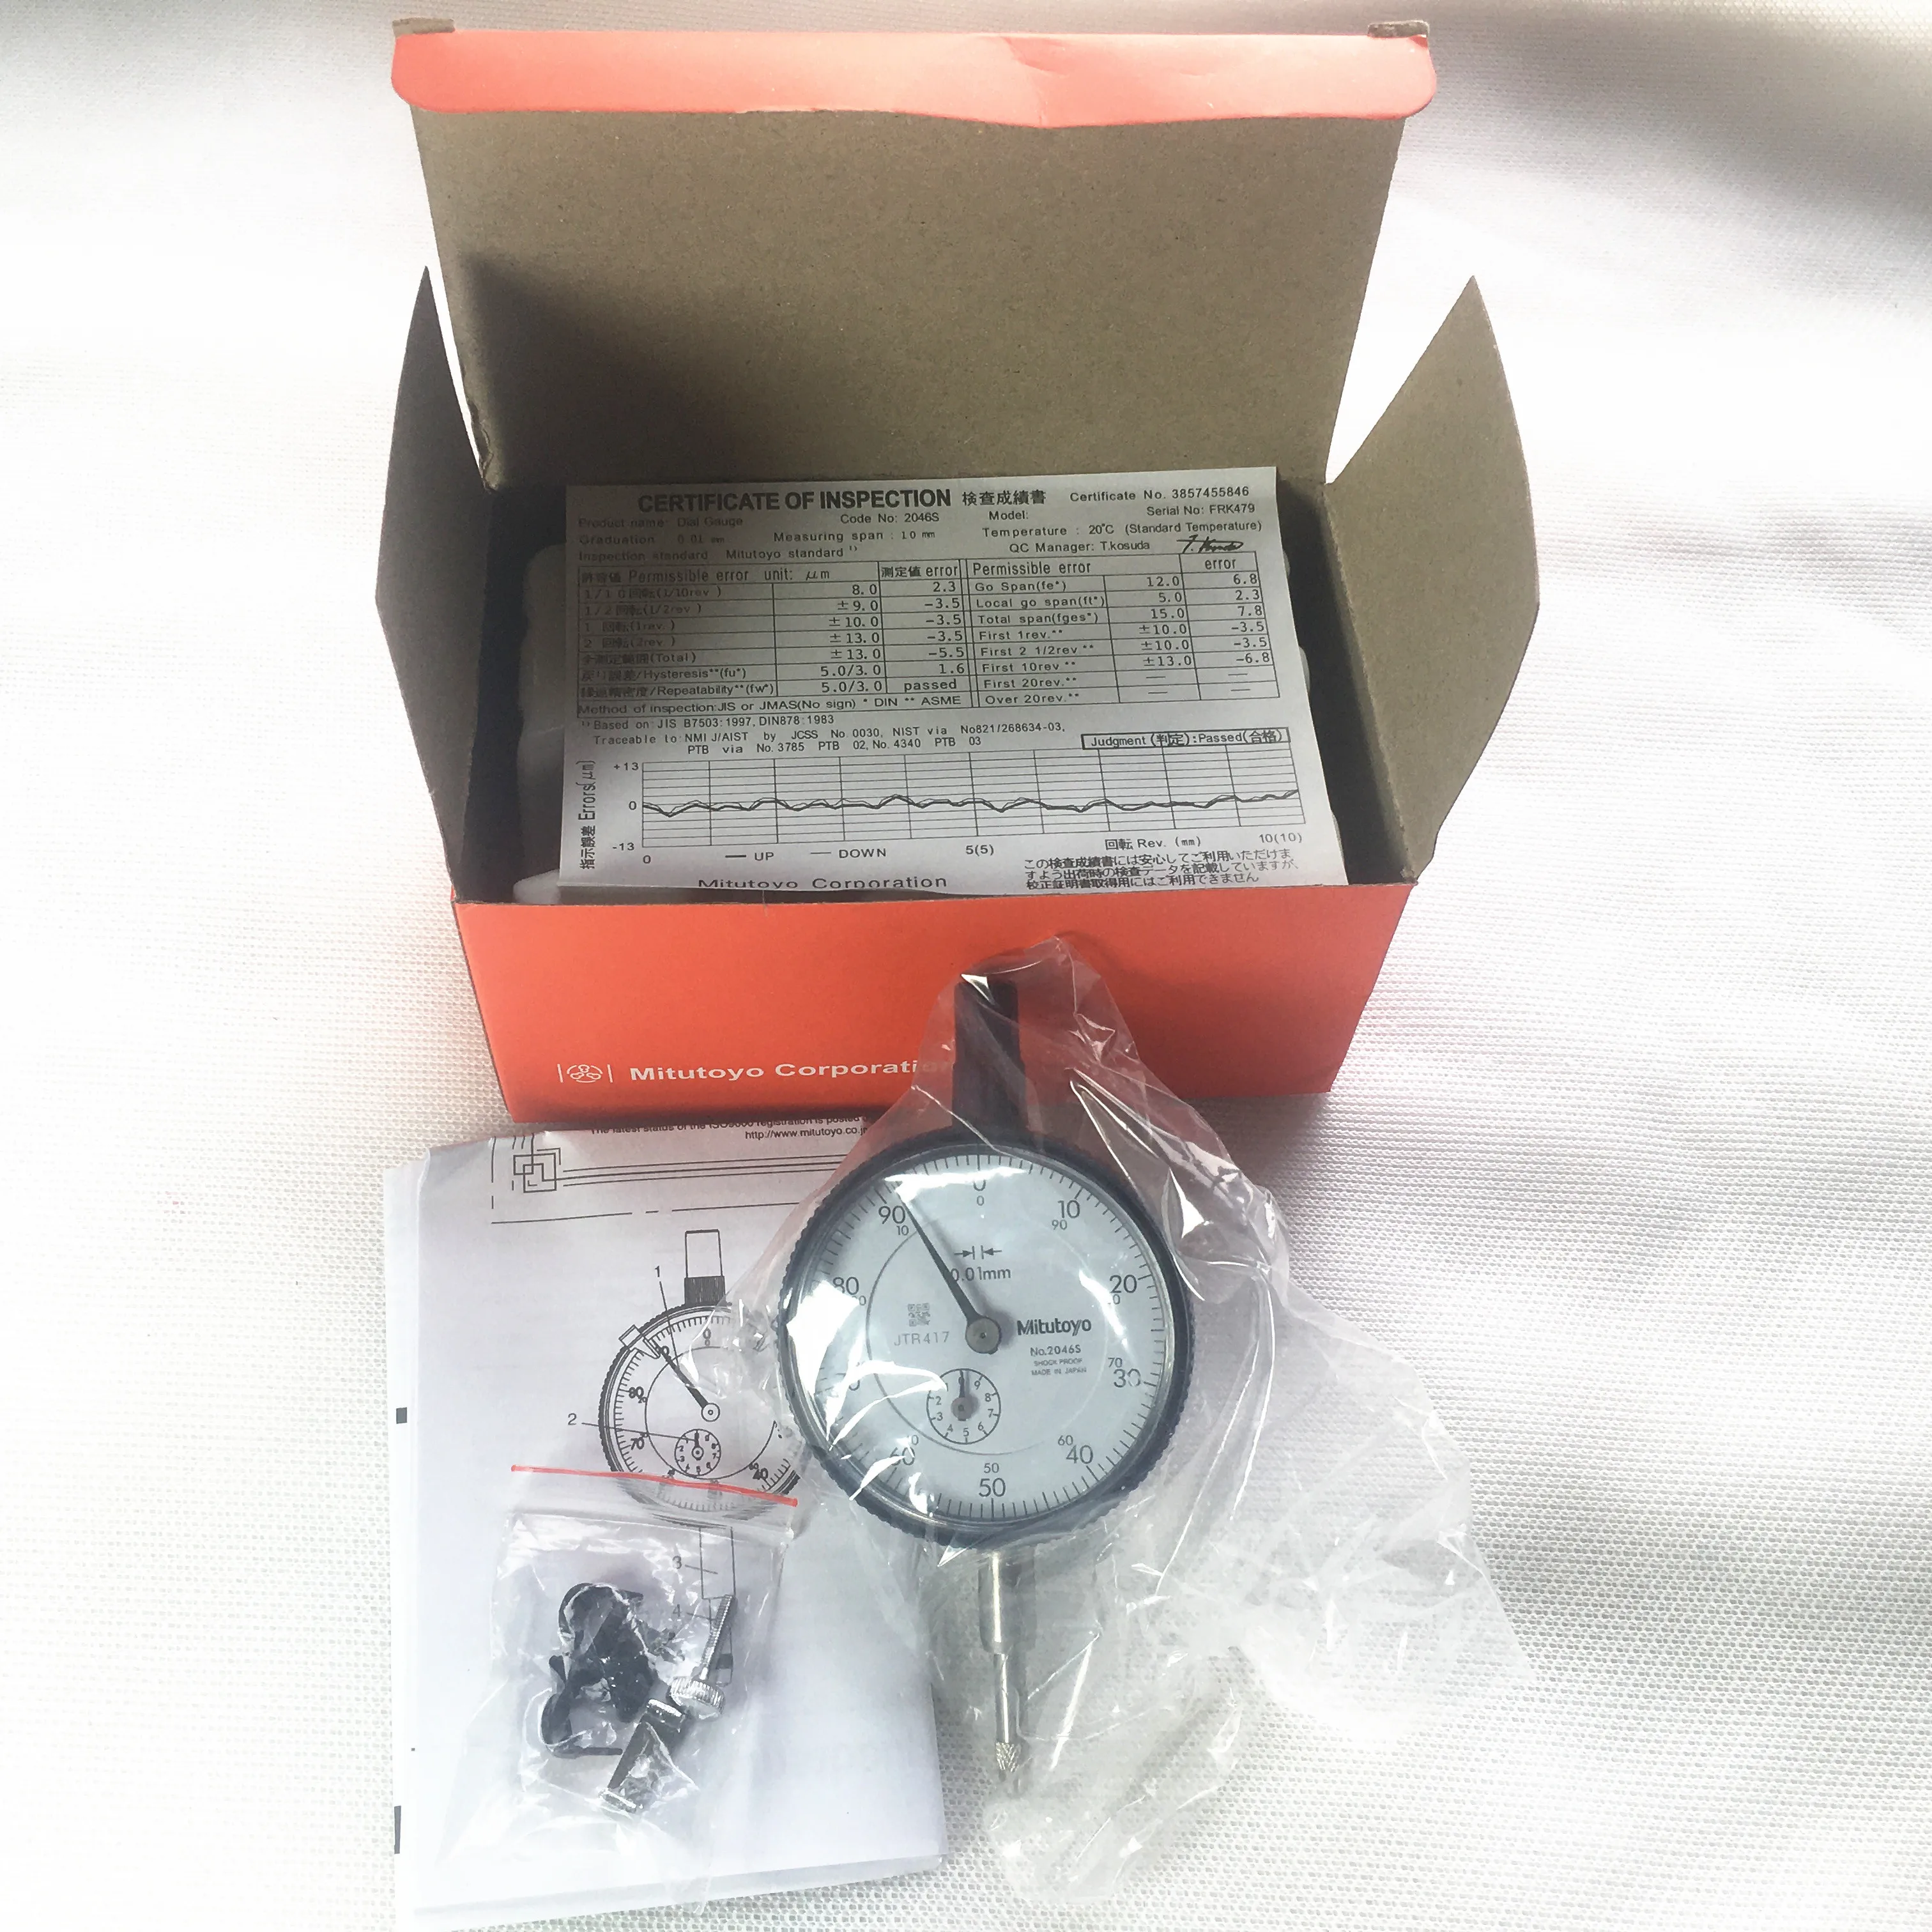 

2023 NEW Dial Indicator 0-10mm 2046S Precise 0.01mm Resolution Mesure Instrument Dial Lever Table Gauge Tools